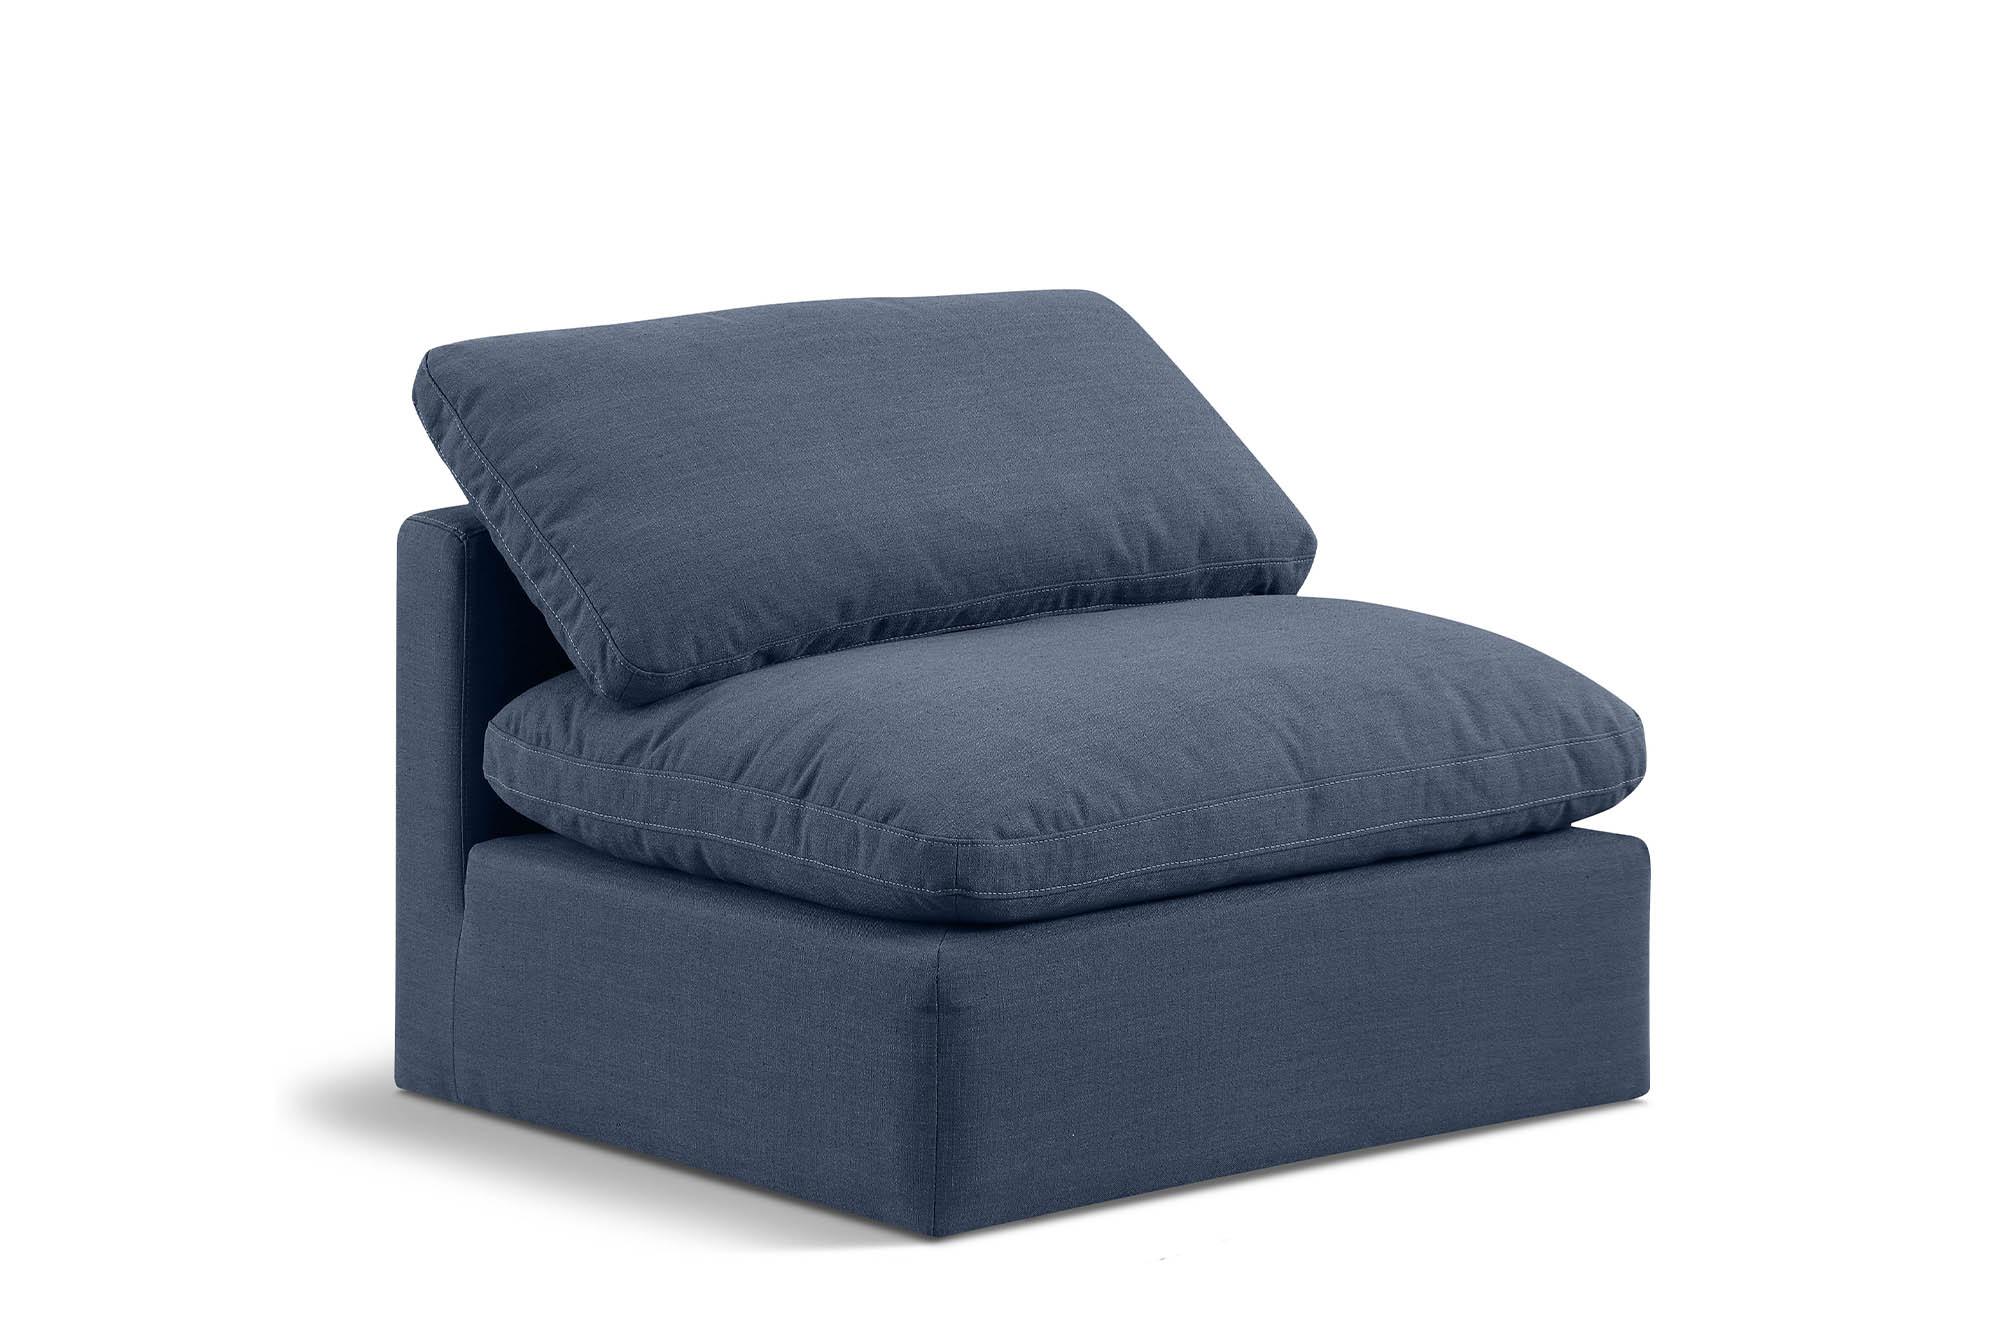 Contemporary, Modern Armless Chair INDULGE 141Navy-Armless 141Navy-Armless in Navy Linen